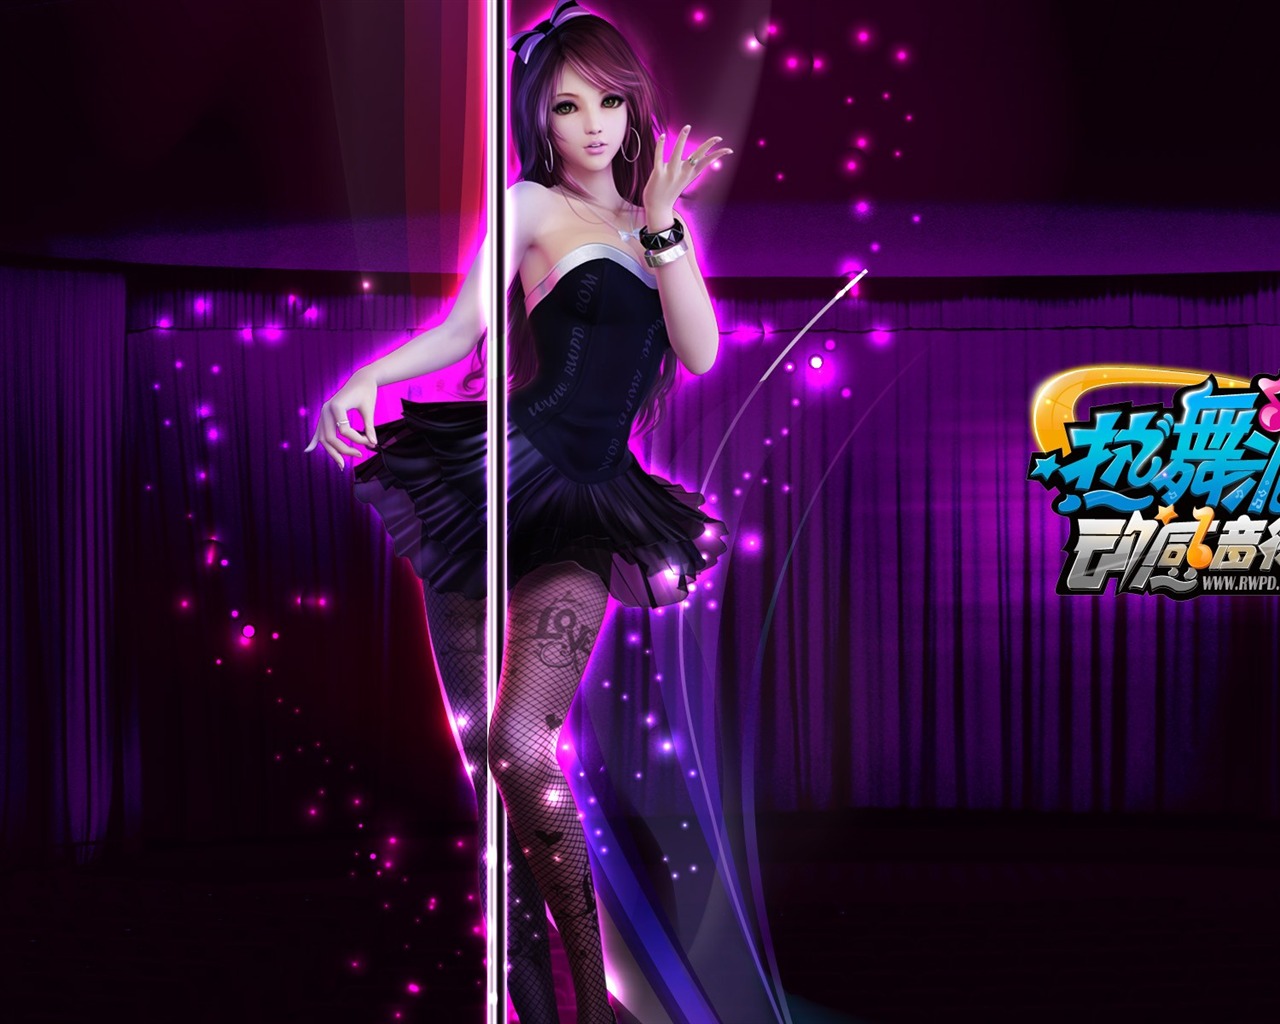 Online game Hot Dance Party II official wallpapers #30 - 1280x1024